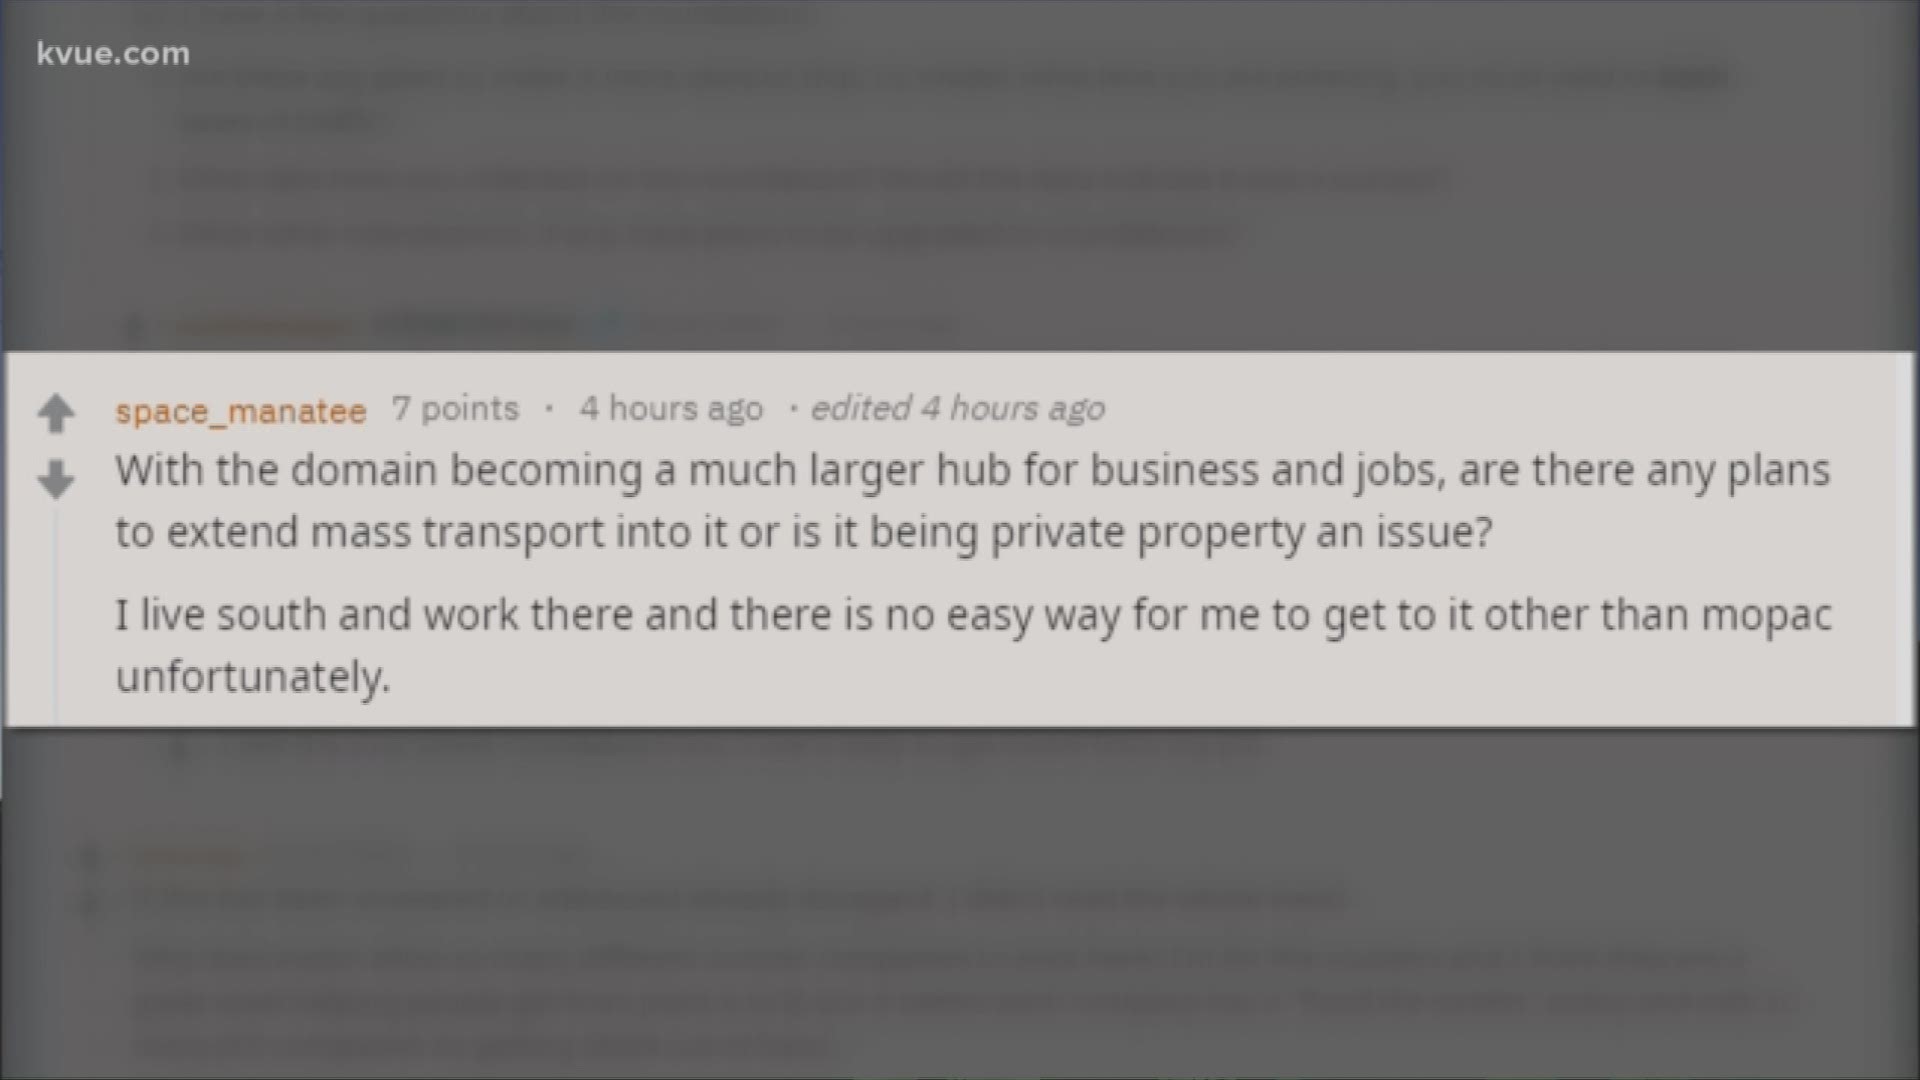 The City made the "ask me anything" post and people asked about the Strategic Mobility Plan.